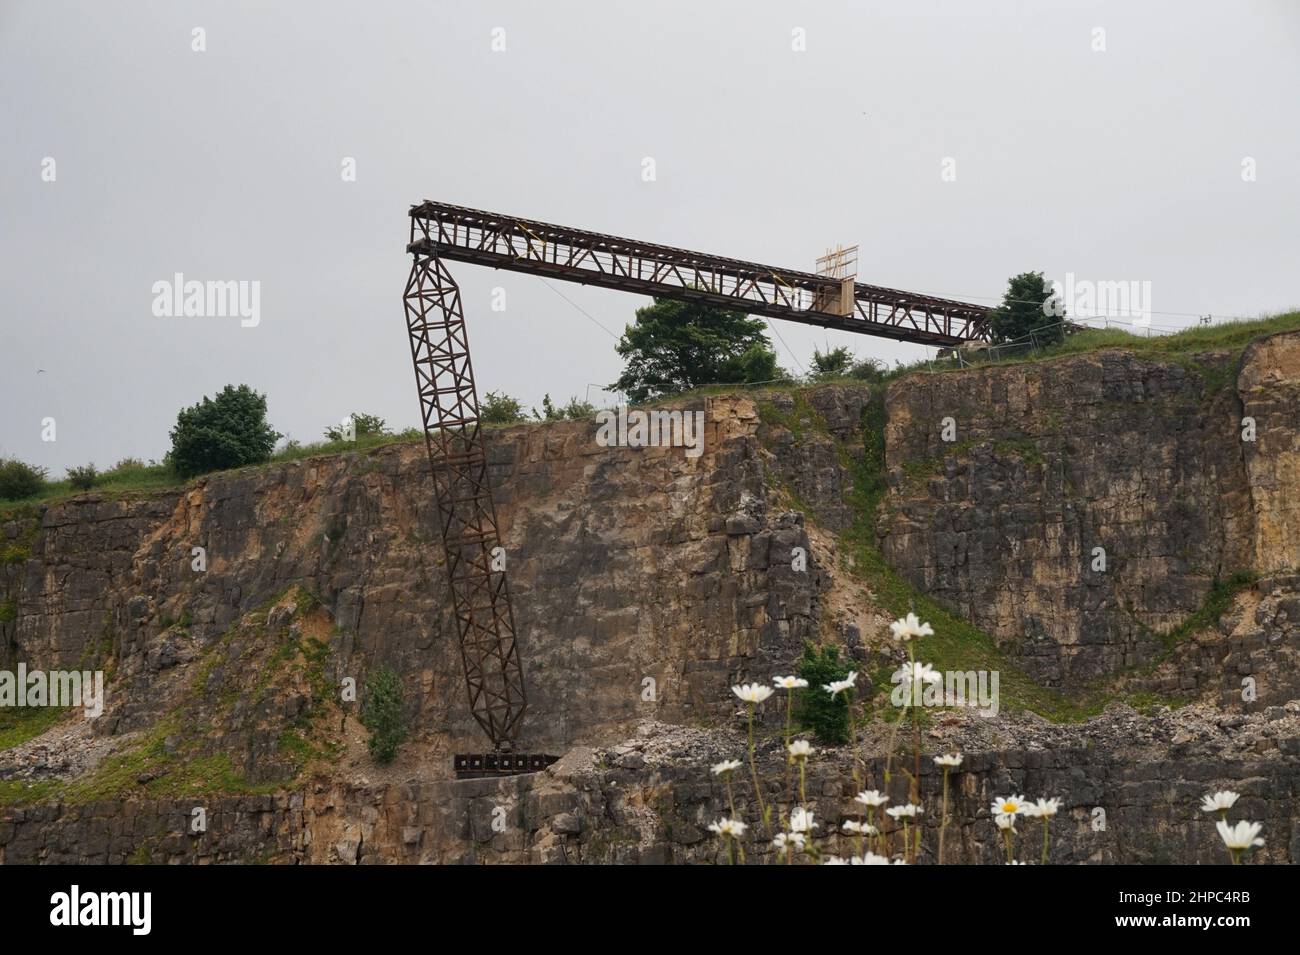 A fake railway bridge built over a disused quarry in the Peak District, UK, for a stunt involving a train crash for the film Mission Impossible 7. Stock Photo